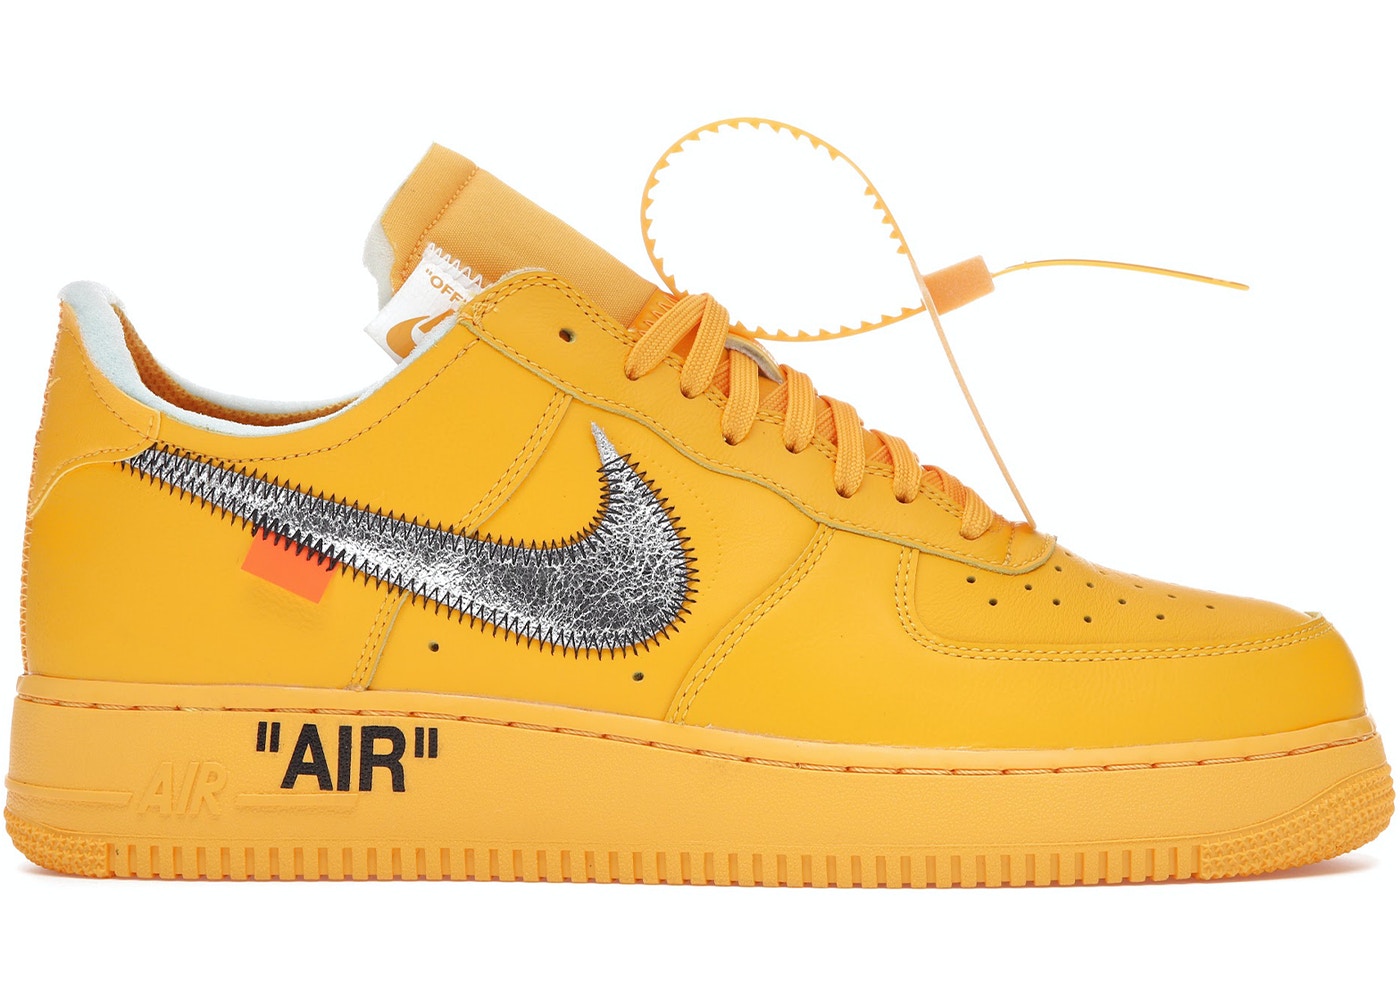 Size 8 - Nike Air Force 1 Low OFF-WHITE University Gold Metallic Silver